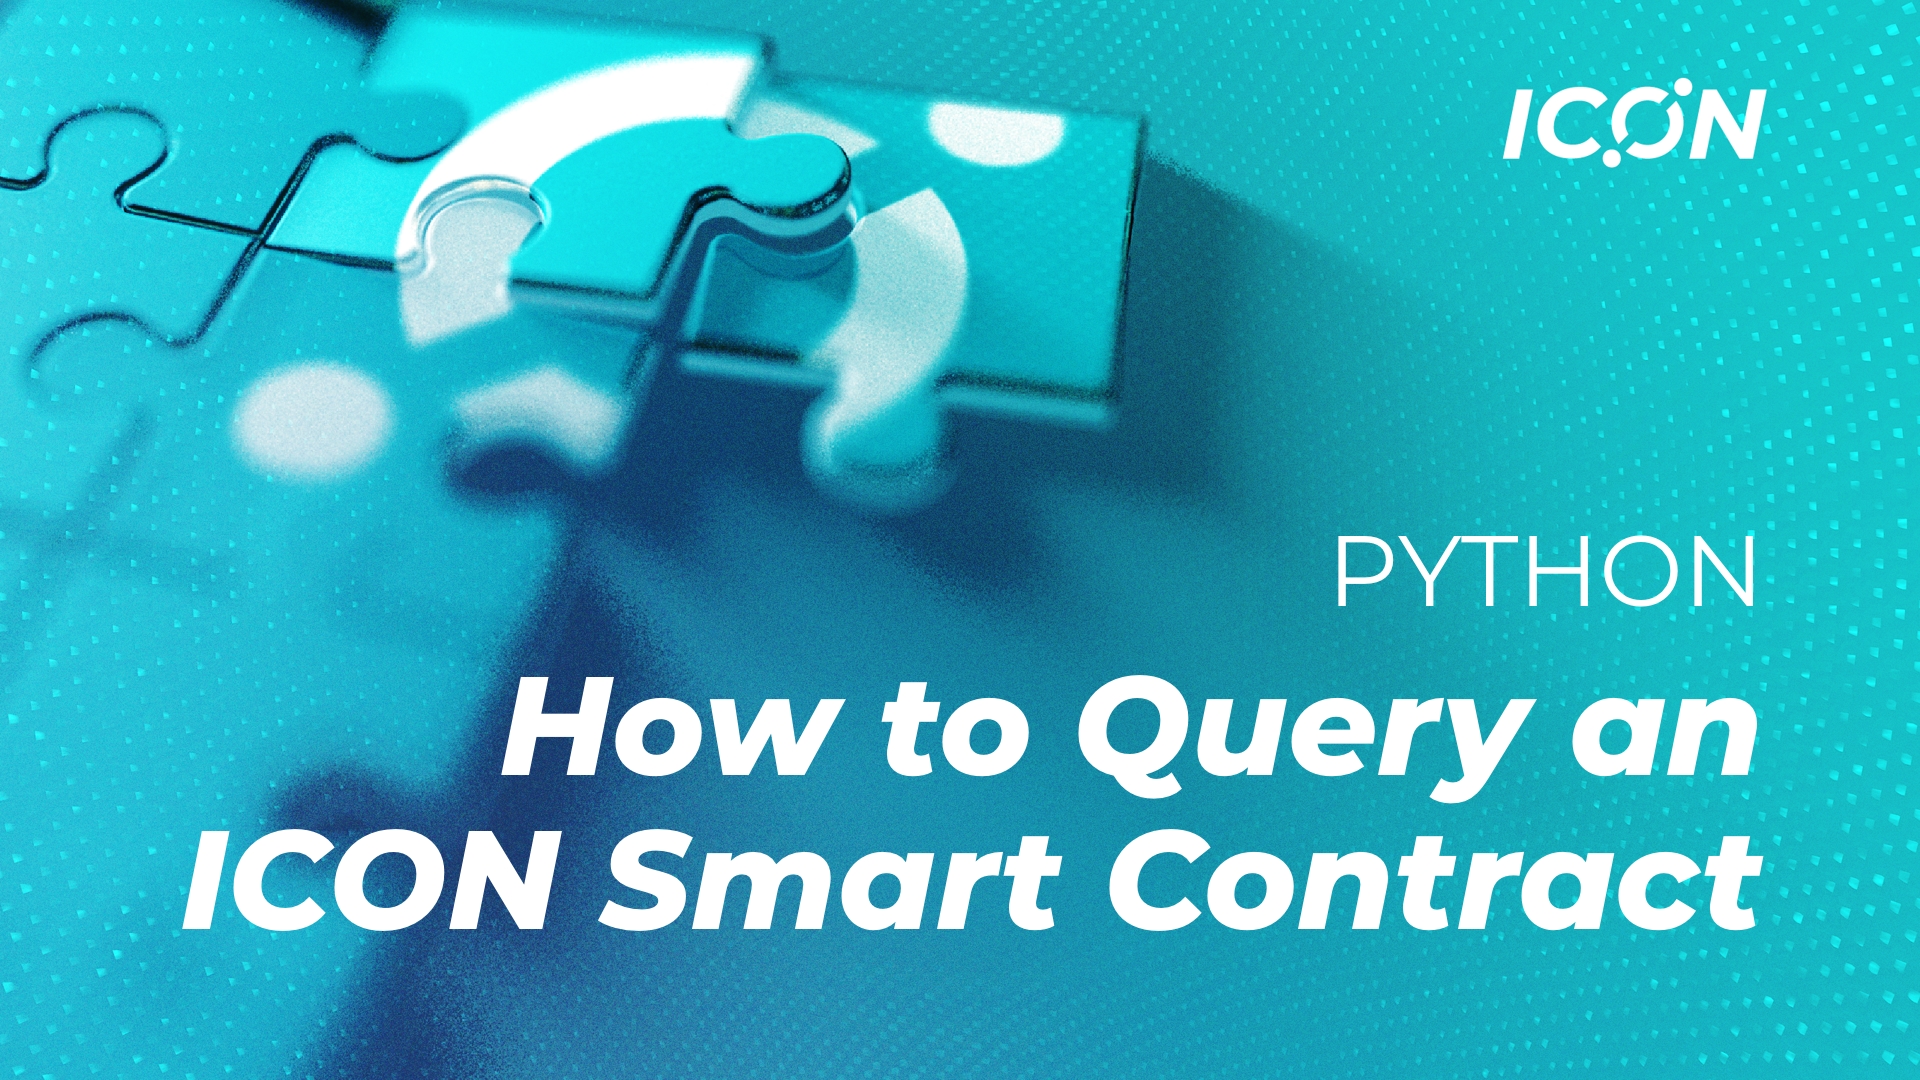 Learn how to query an ICON smart contract with the ICON Python SDK.